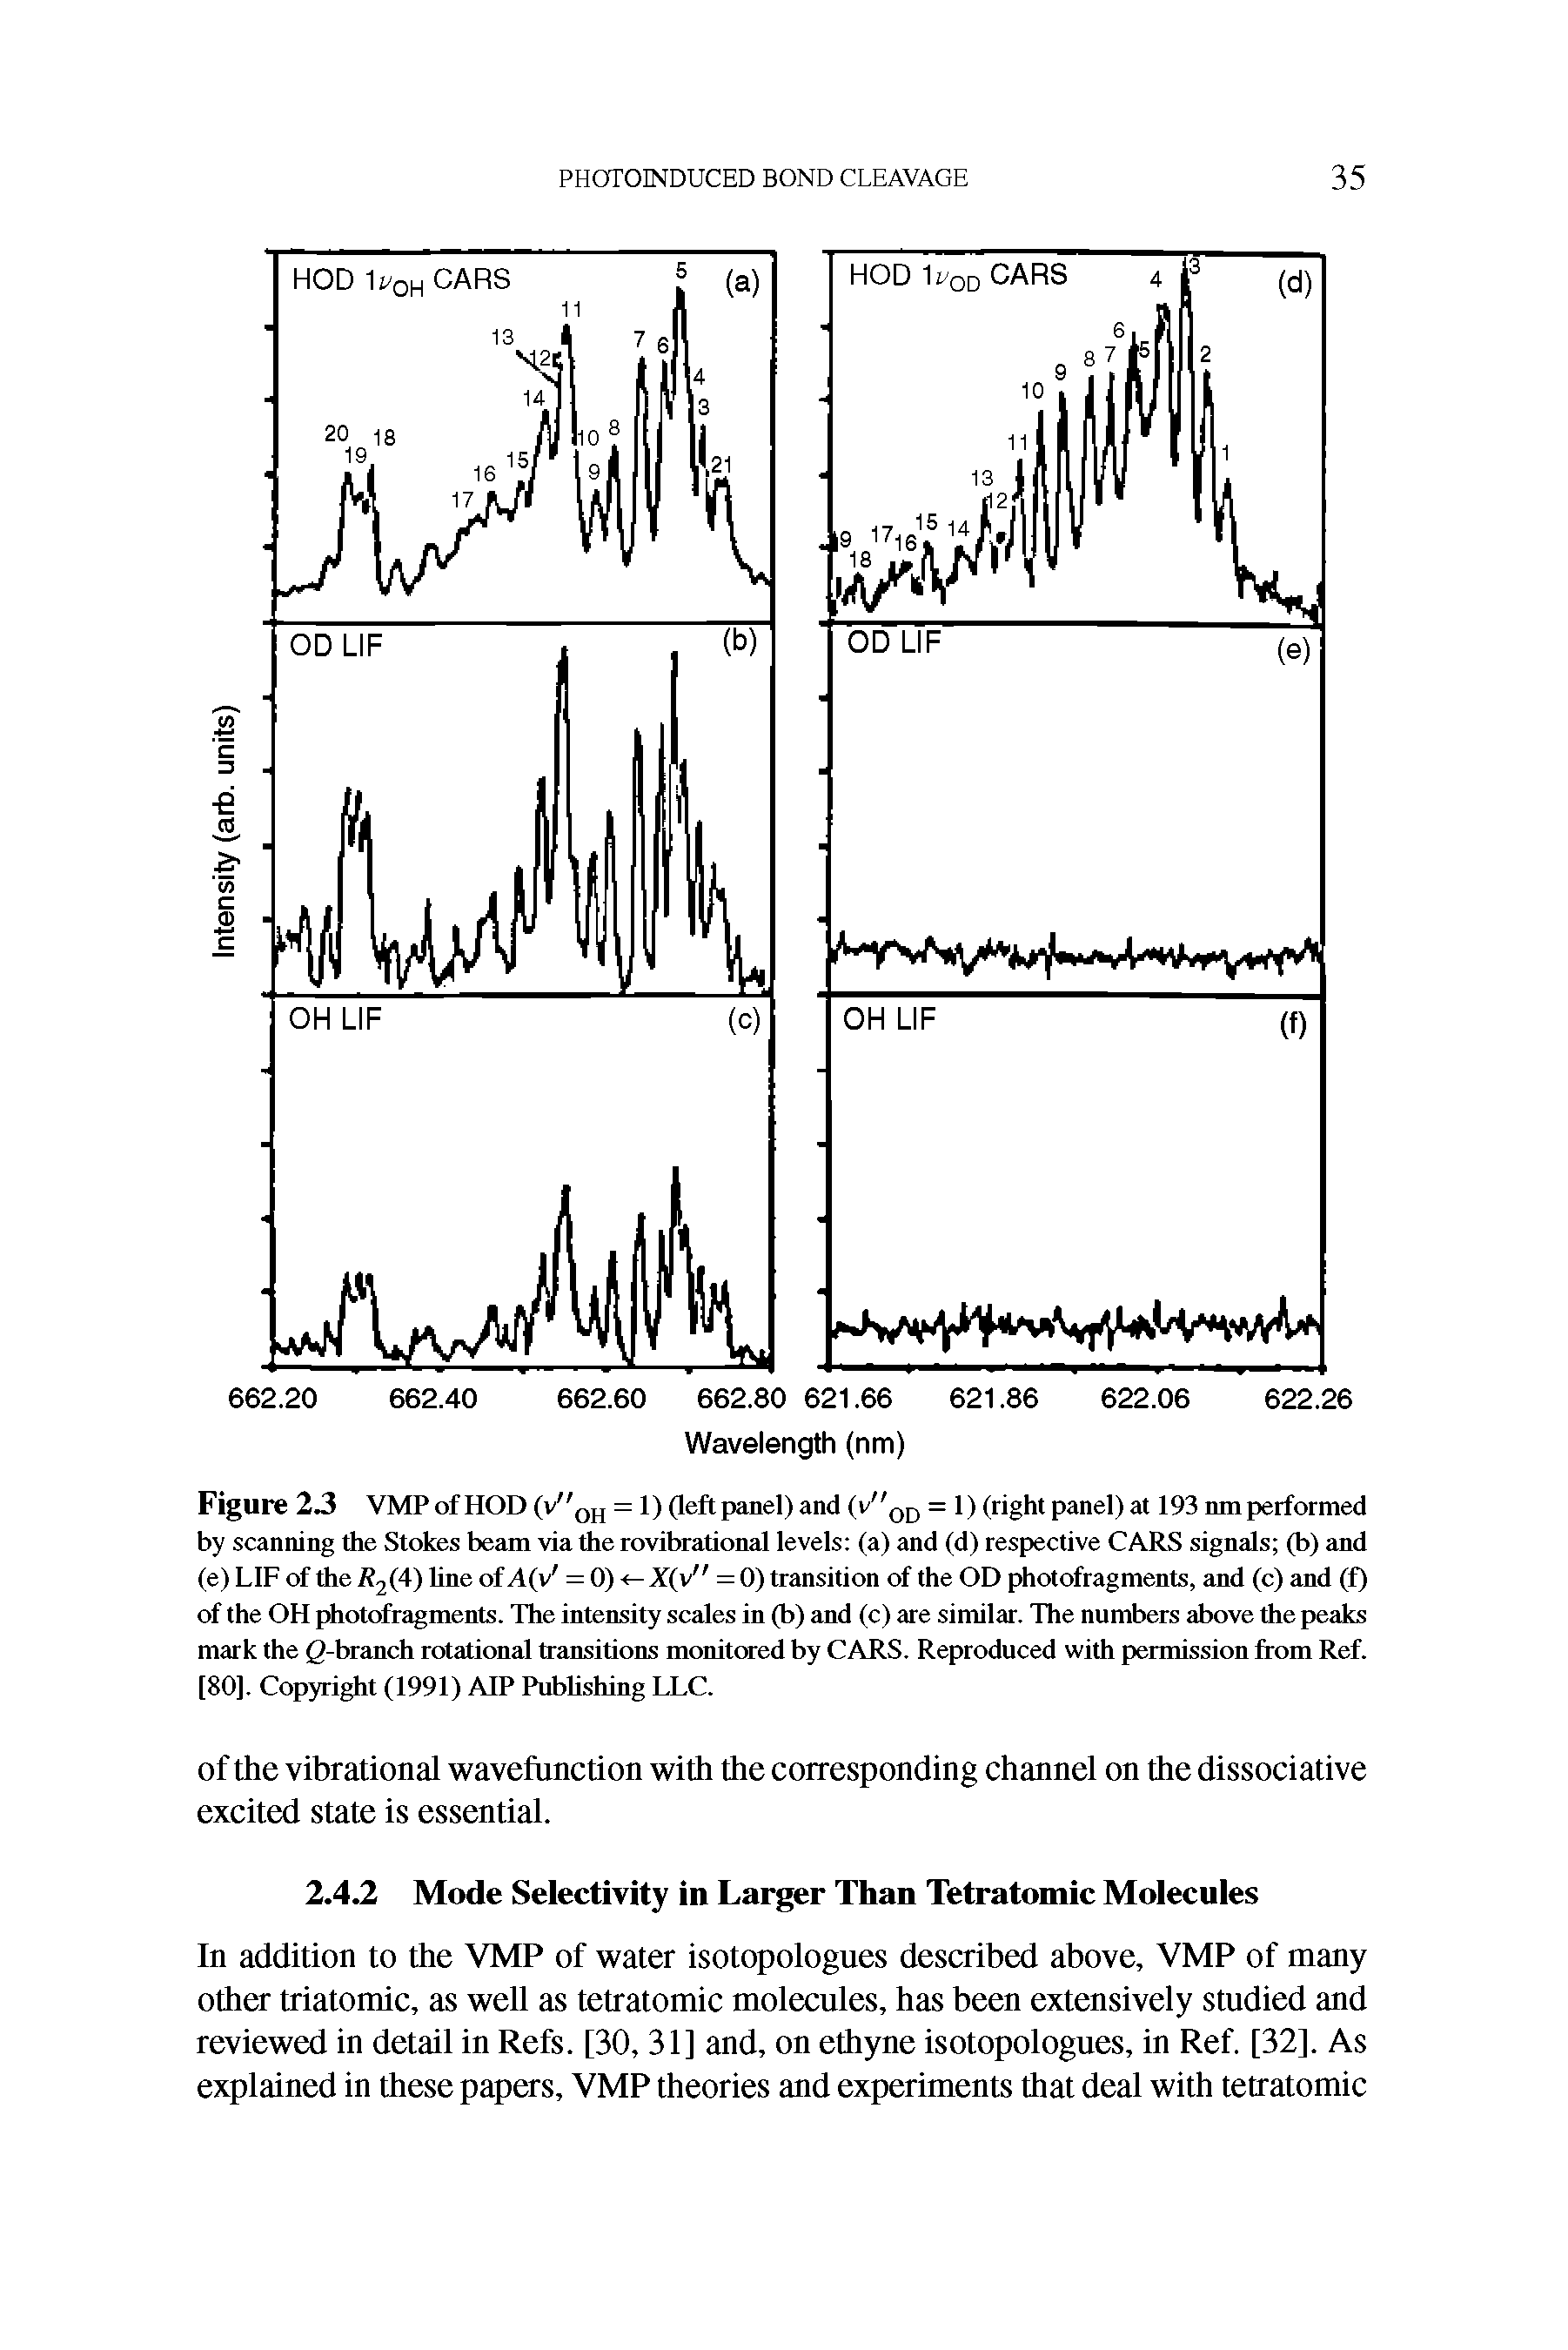 Figure 23 VMPof HOD (v"qjj = 1) (left panel) and (v"oi3 = 1) (right panel) at 193 nm performed by scanning the Stokes beam via the rovibrational levels (a) and (d) respective CARS signals (b) and (e)LIF of the/f2(4)lineof A(v = 0)<-3f(v" = 0) transition of the OD photofragments, and (c) and (f) of the OH photofragments. The intensity scales in (b) and (c) are similar. The numbers above the peaks mark the g-branch rotational transitions monitored by CARS. Reproduced with permission from Ref. [80]. Copyright (1991) AIP Publishing LLC.